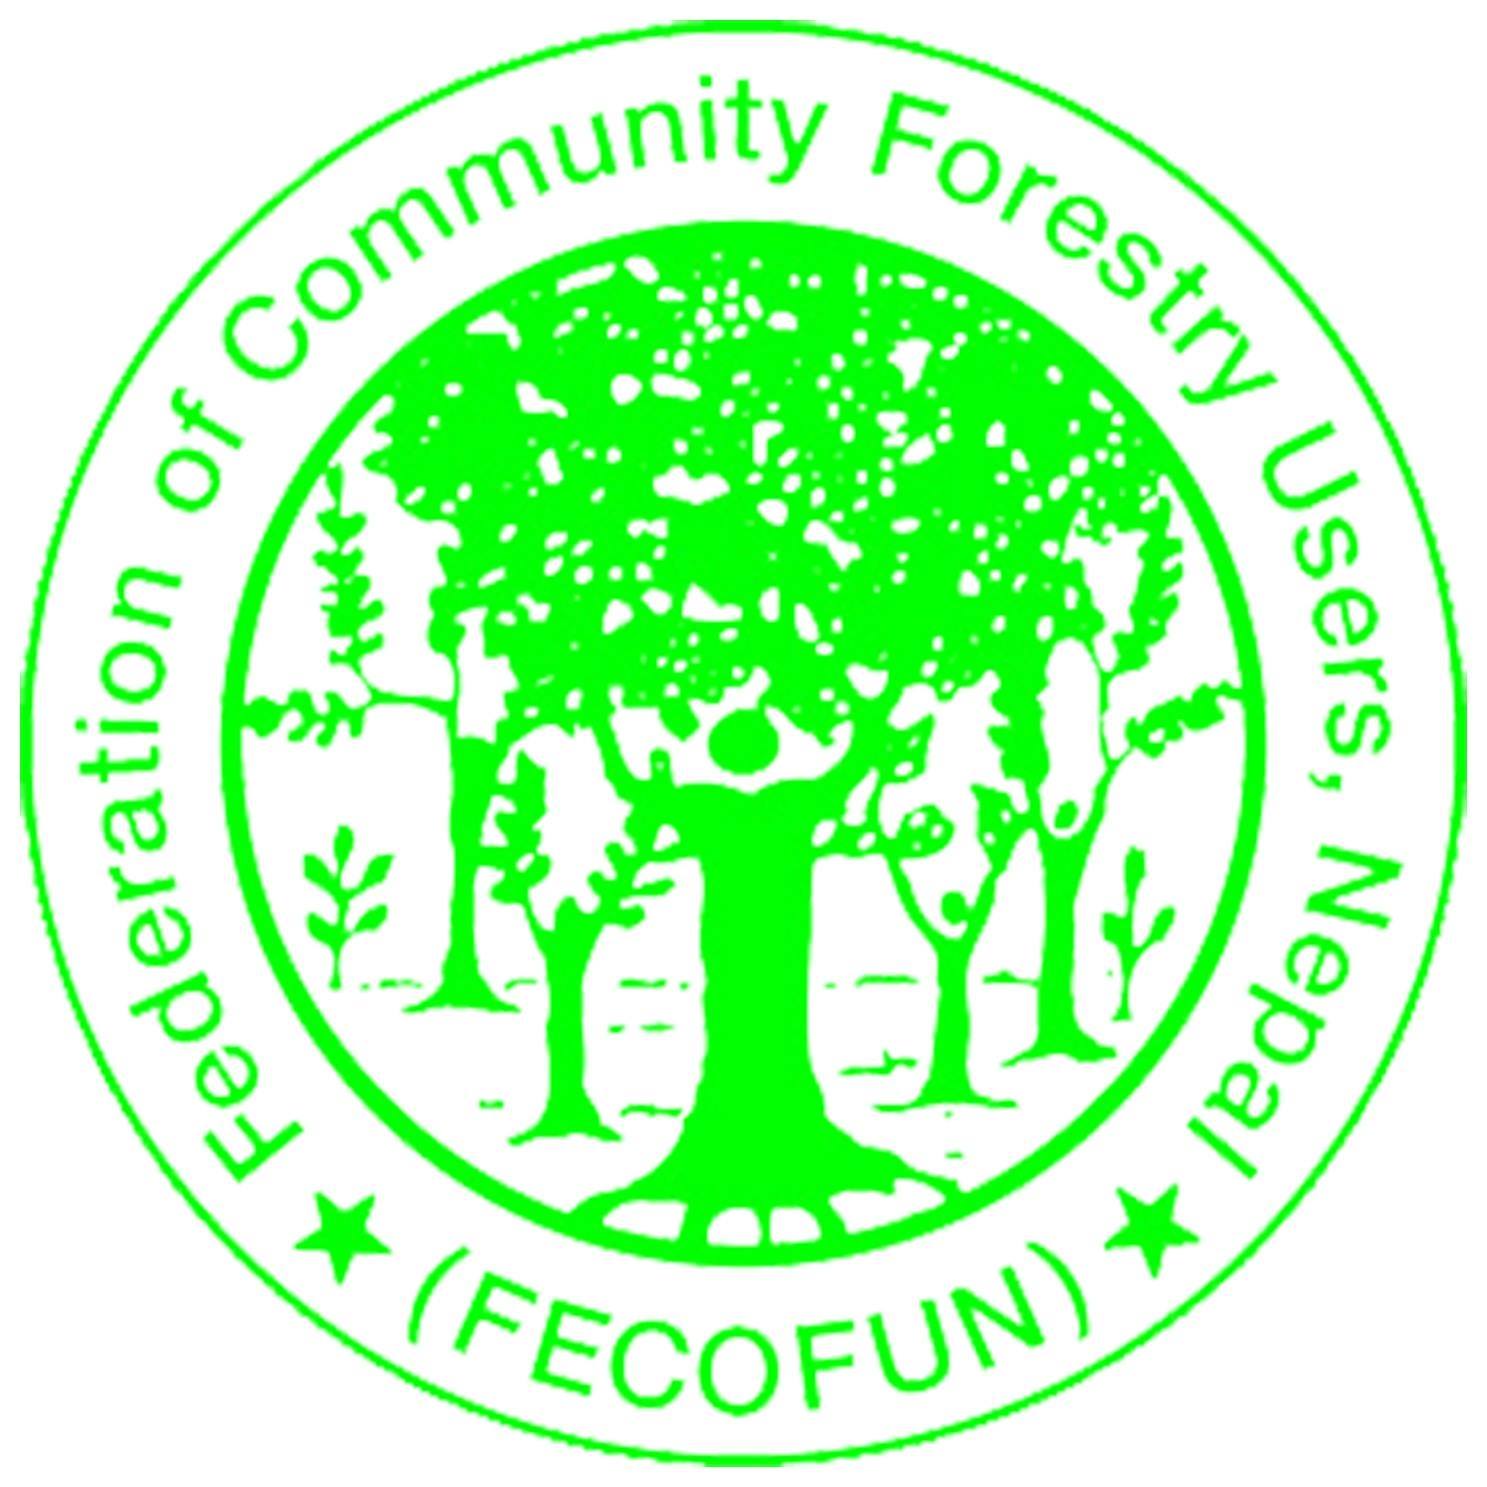 FECOFUN objects to multiple taxation and some provisions of Forest Regulations